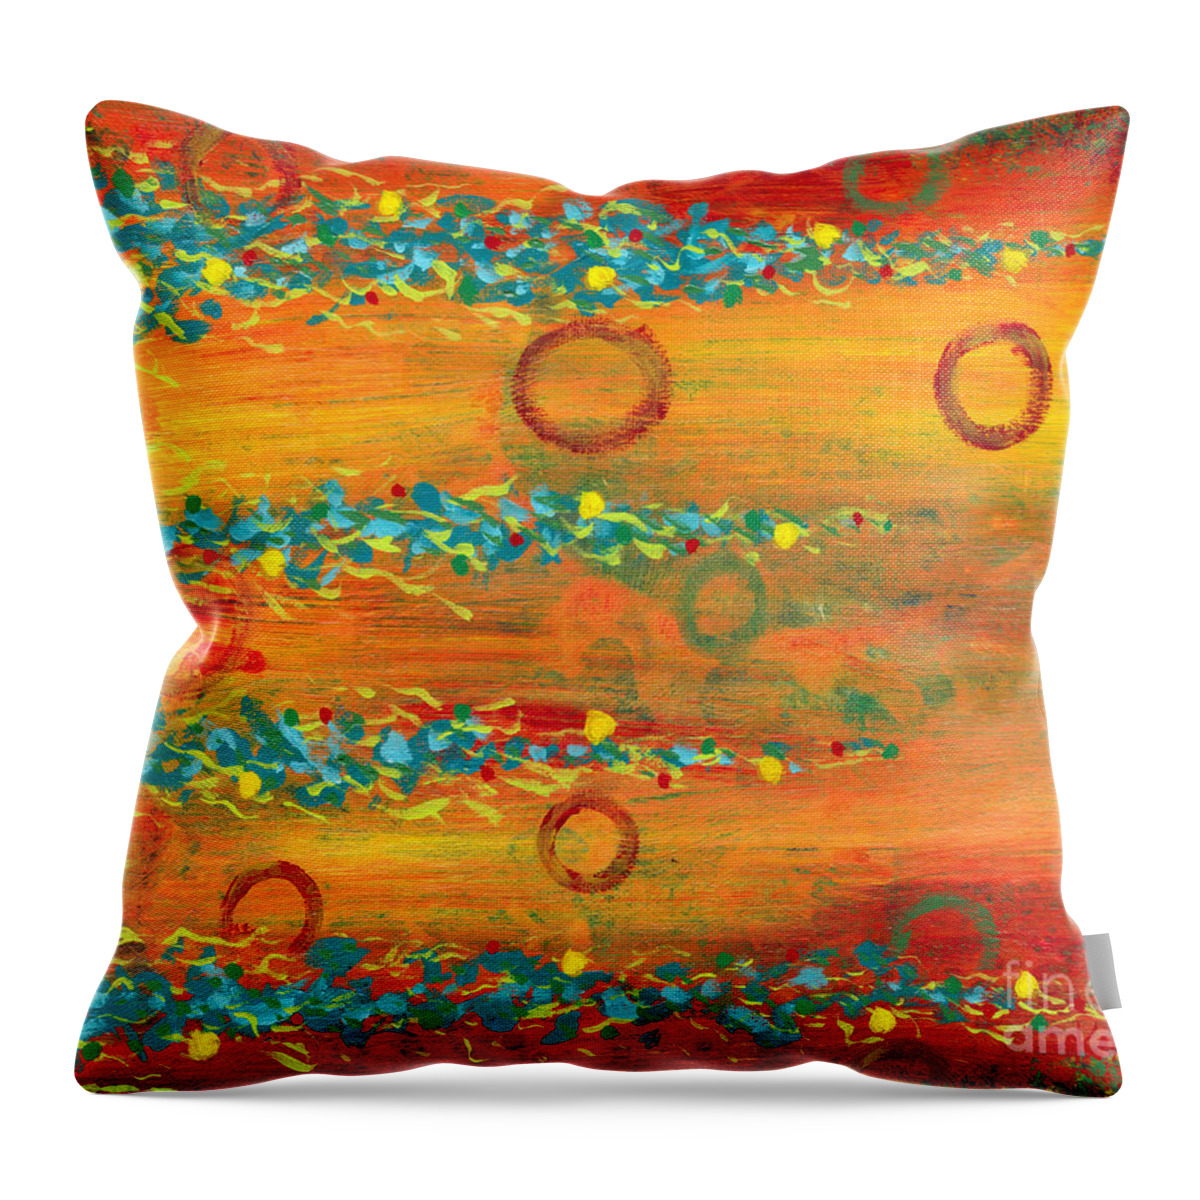 Artoffoxvox Throw Pillow featuring the painting Fiesta Painting by Kristen Fox